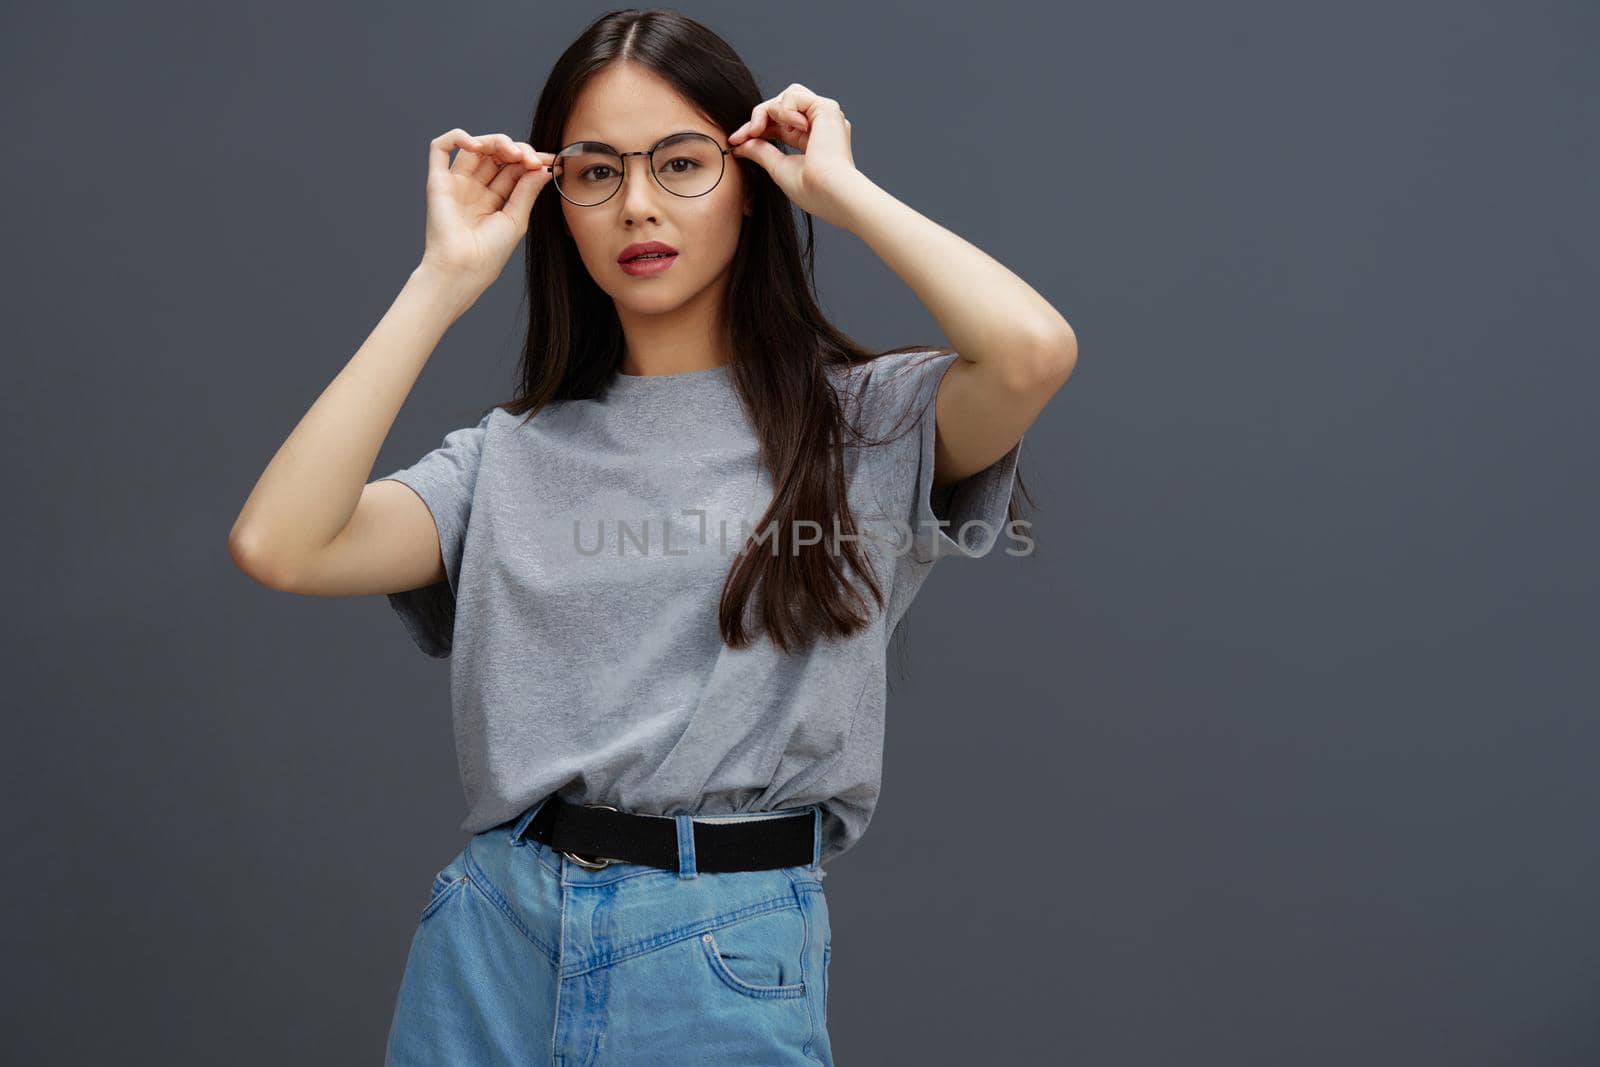 beautiful woman glasses on face fashion lifestyle gray t-shirt Gray background. High quality photo